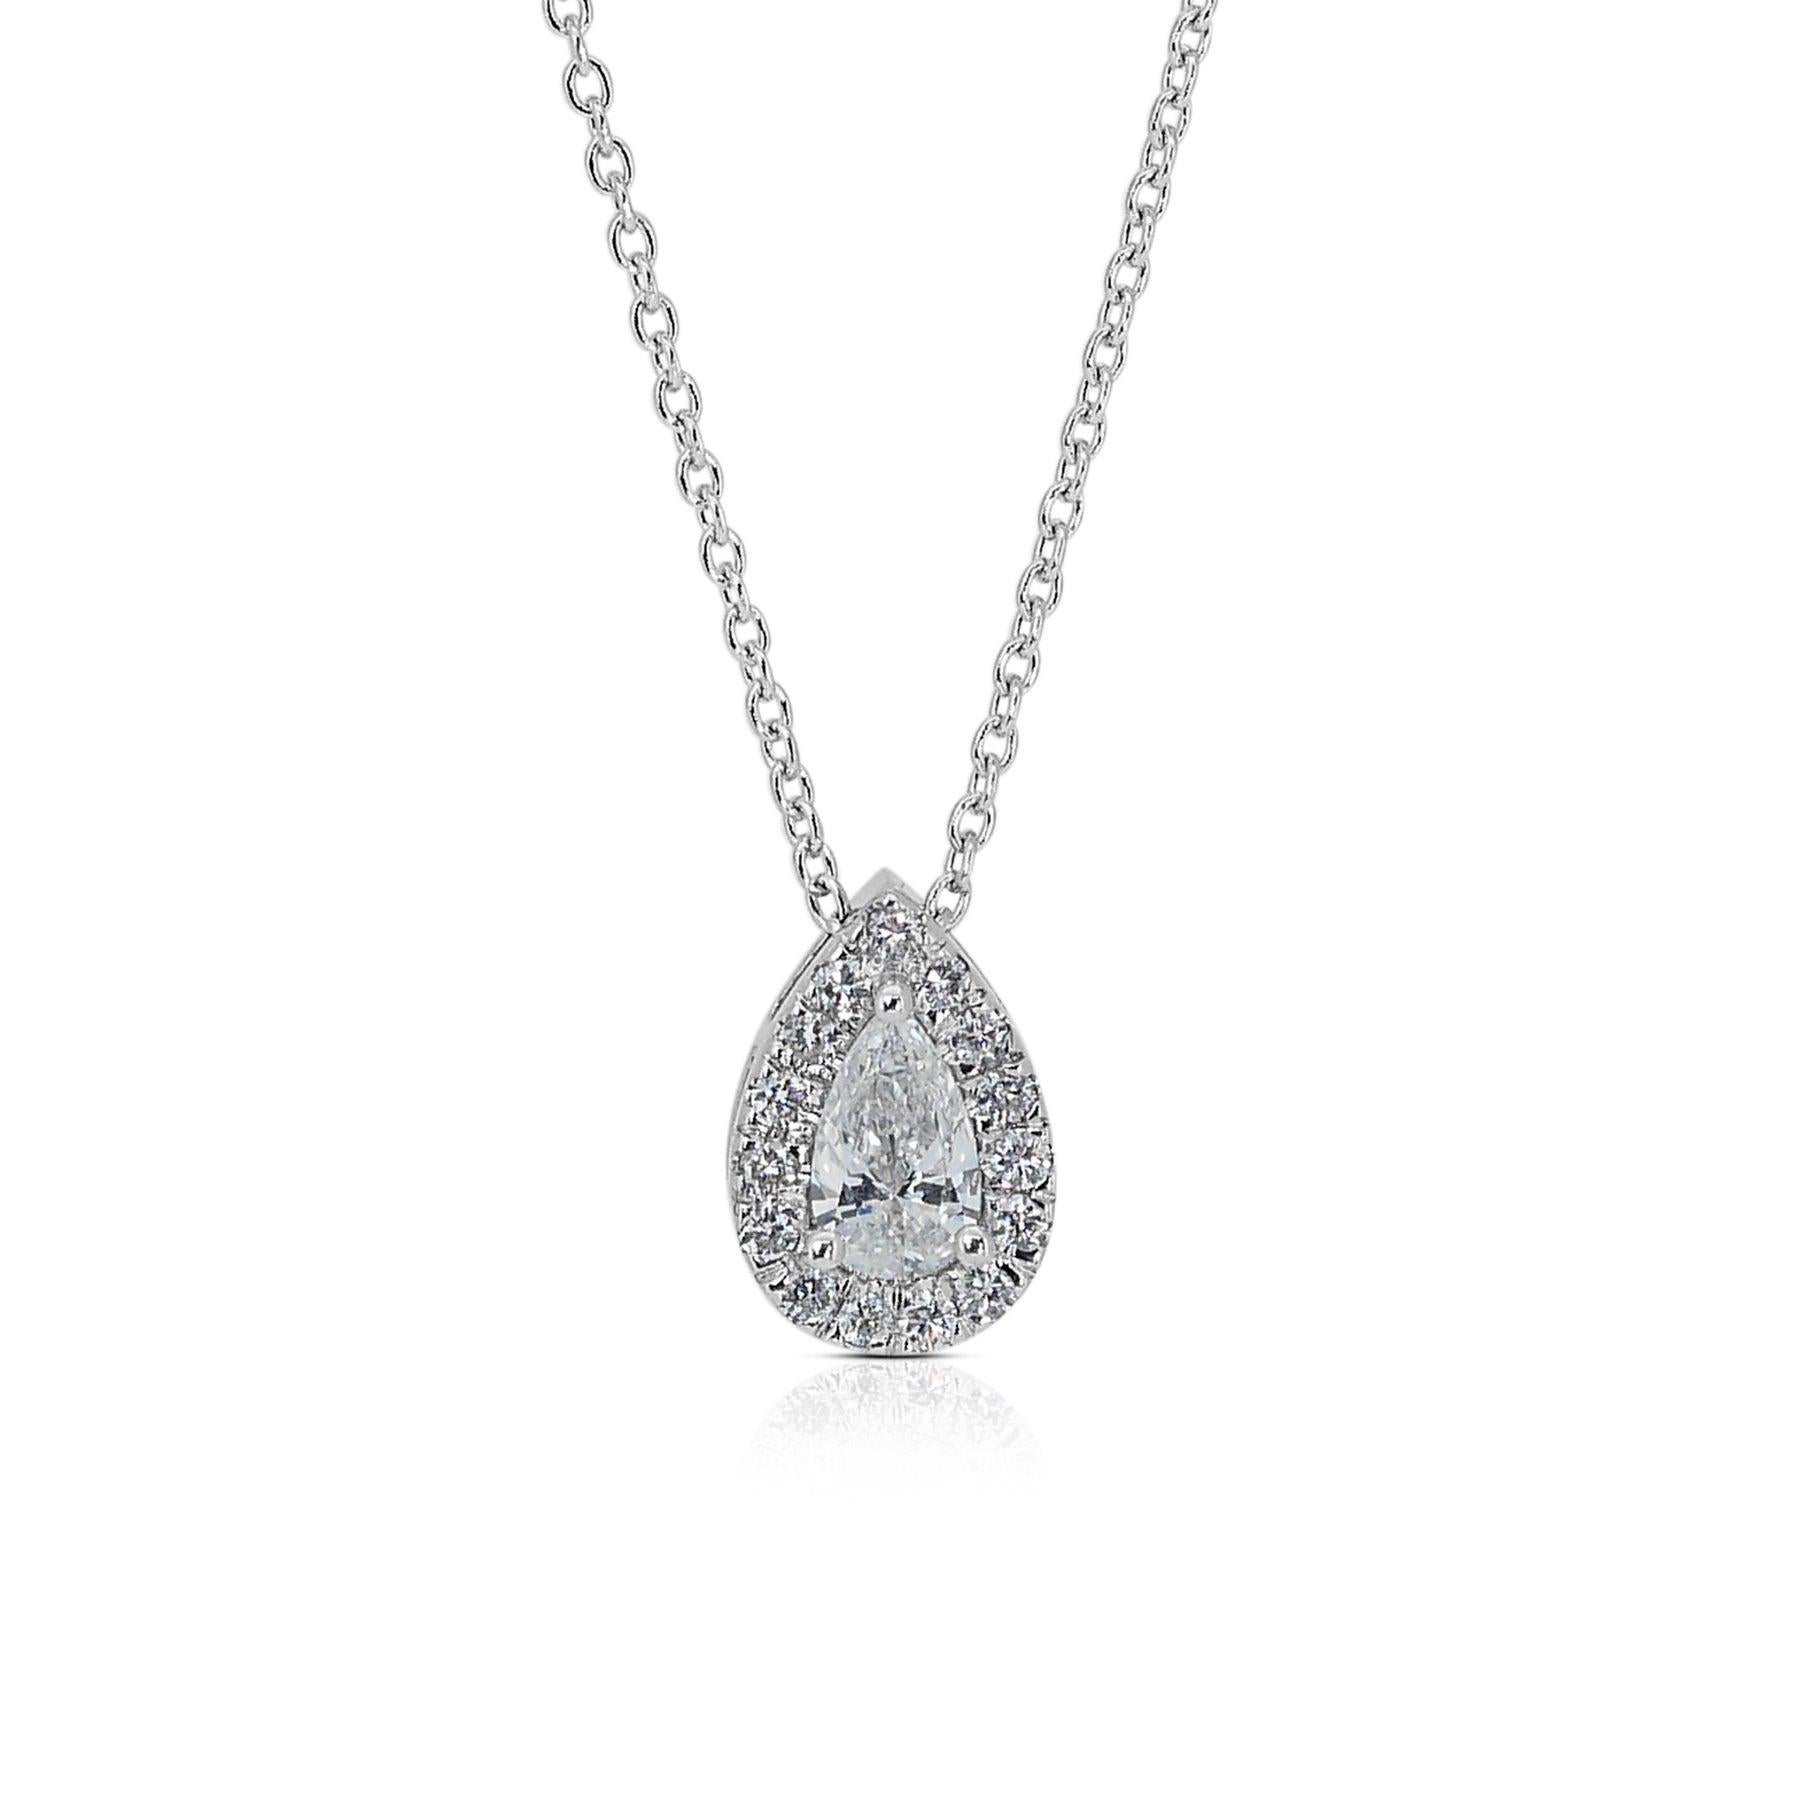 This exquisite pendant features a radiant 0.3-carat pear-shaped natural diamond as its centerpiece, surrounded by a halo of 15 sparkling side diamonds totaling 0.18 carats. Crafted from gleaming 18K white gold, this pendant radiates elegance and